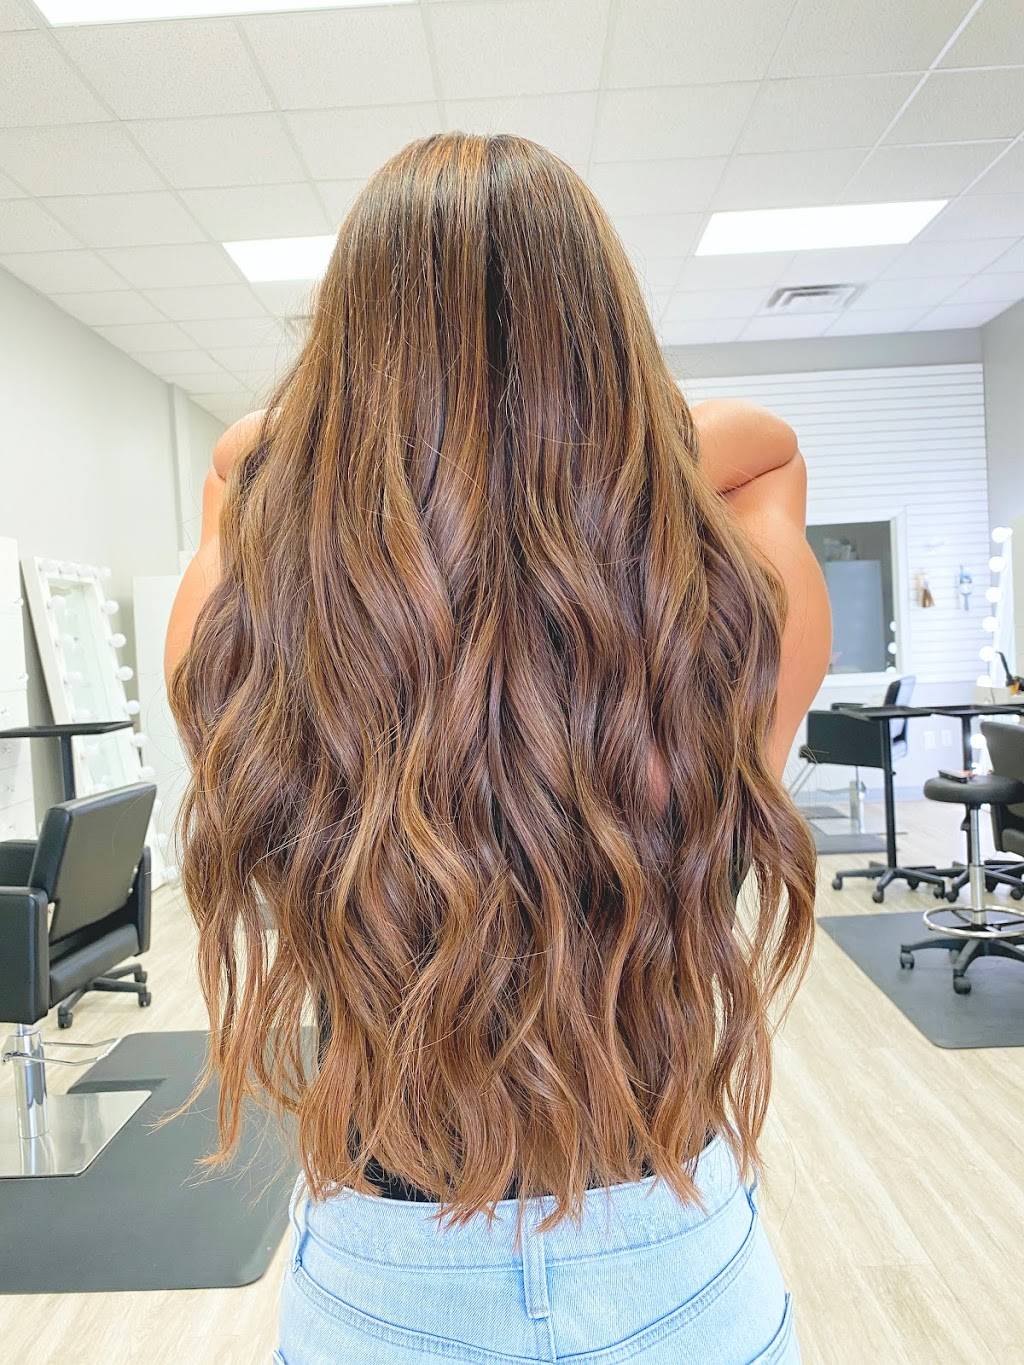 Your Hair Obsession | 11985 Pellicano Dr, El Paso, TX 79936 | Phone: (915) 920-8678